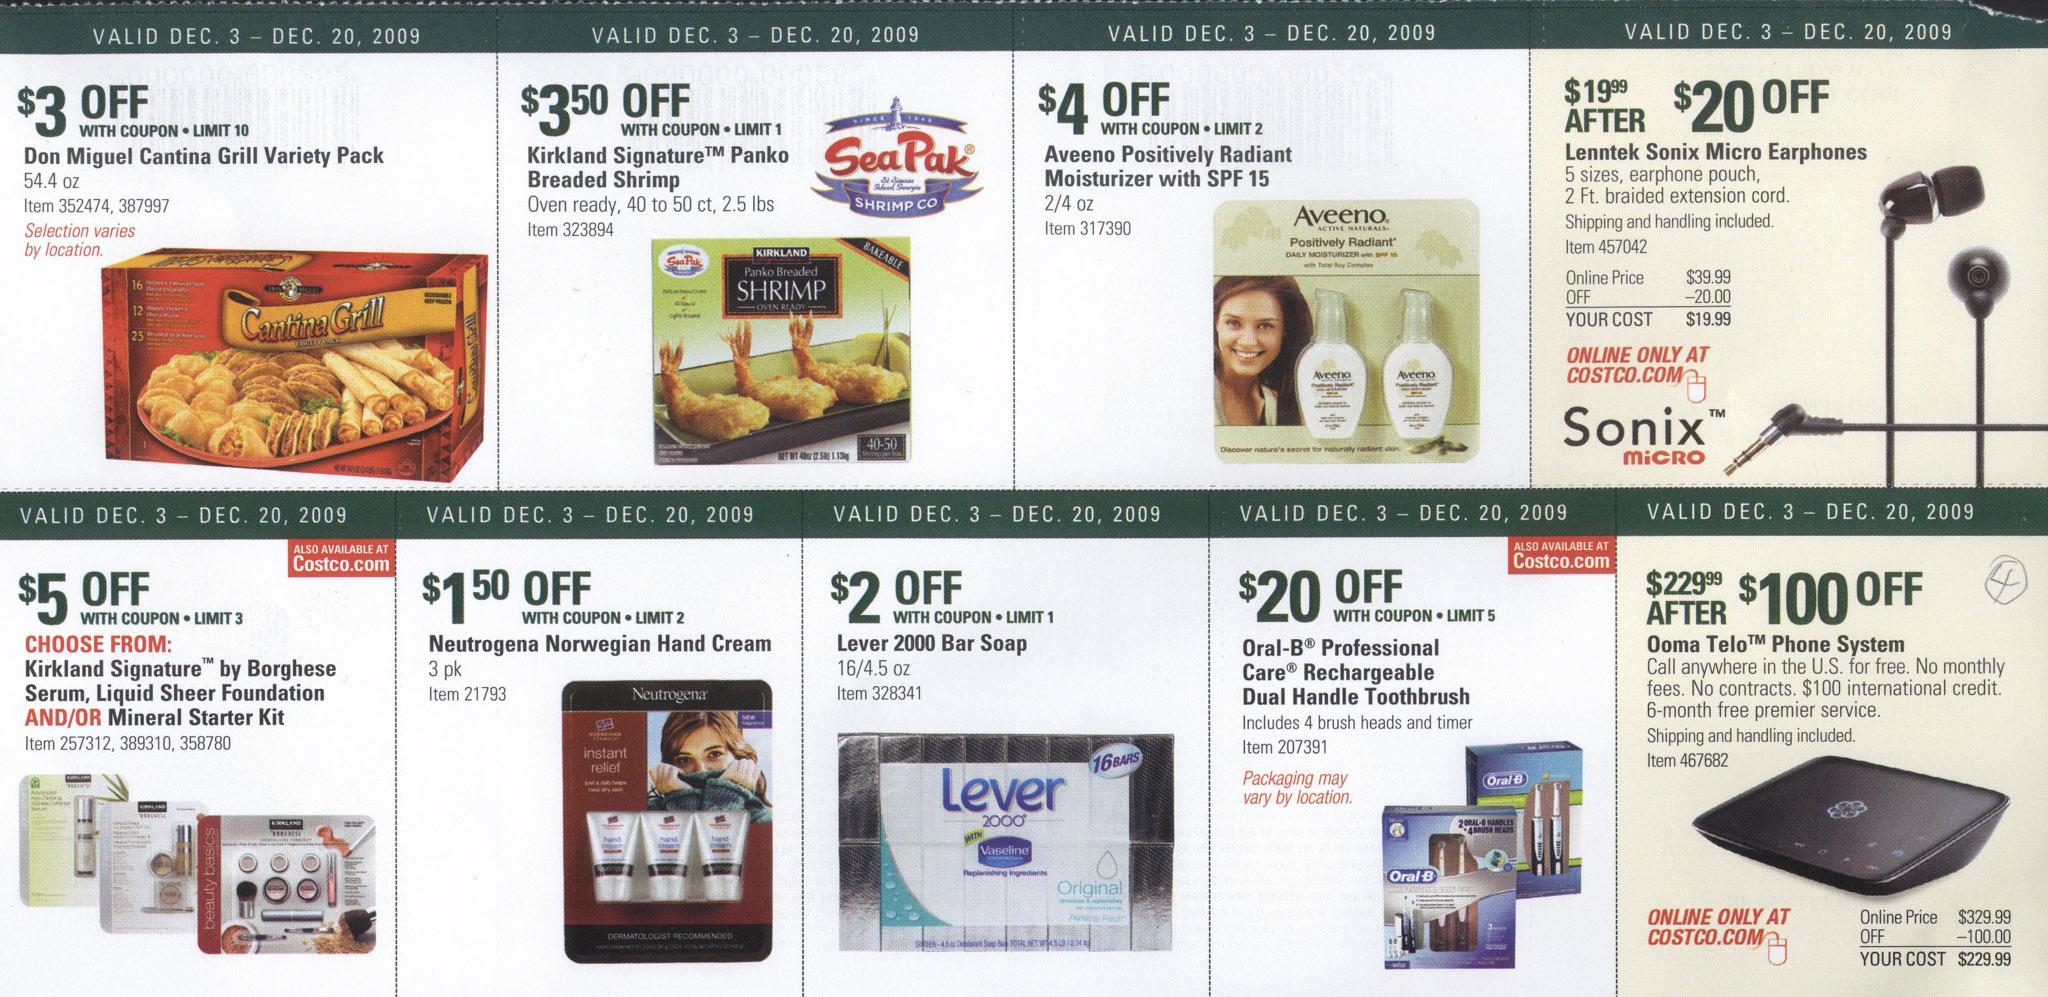 Coupon book page 4 in full-size.